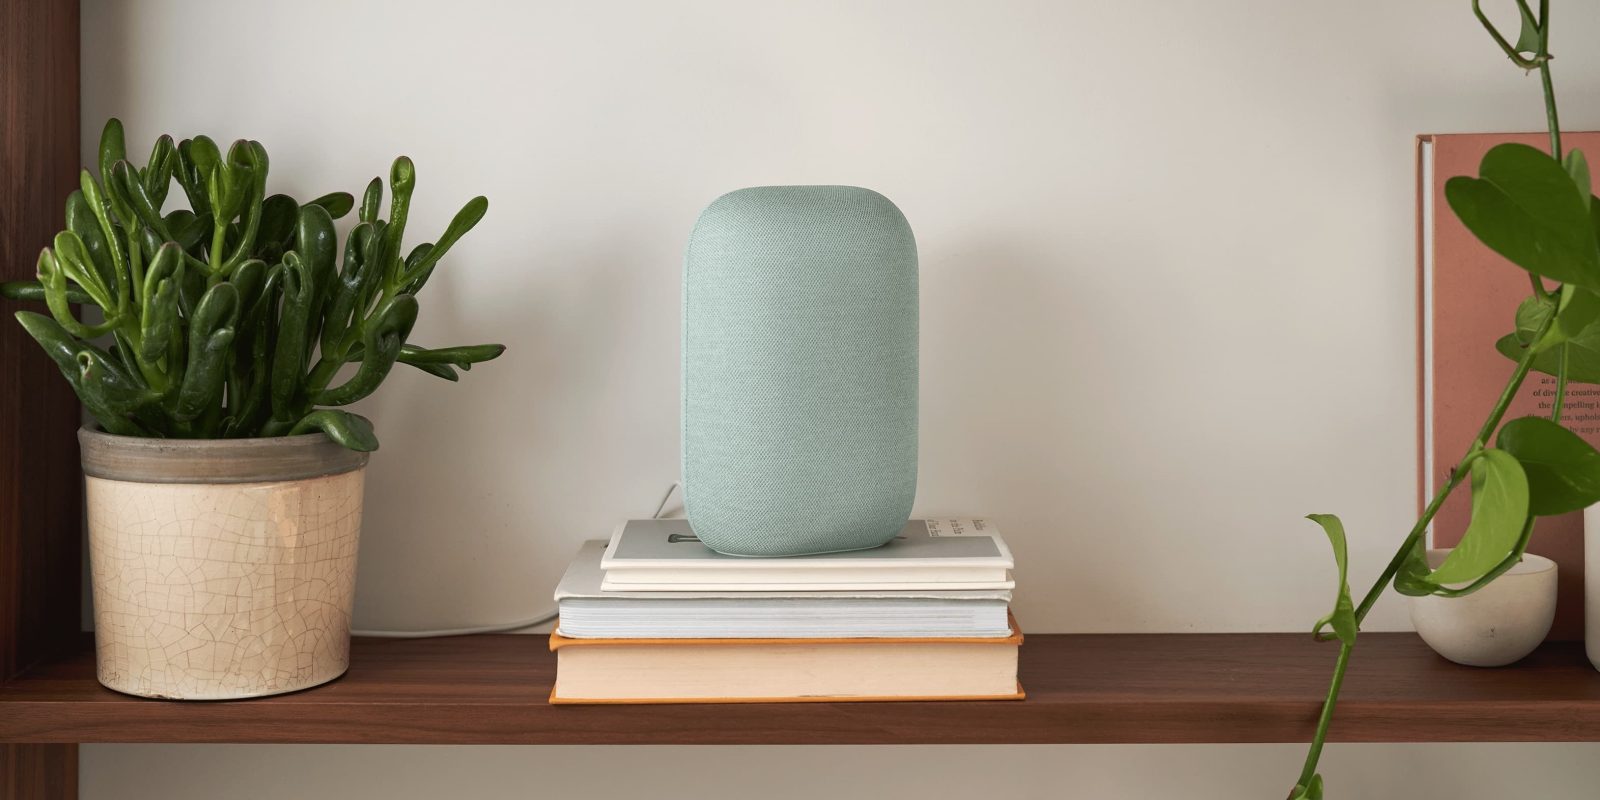 Nest Audio: Google's latest speaker is available Oct 5 for $99 - 9to5Google